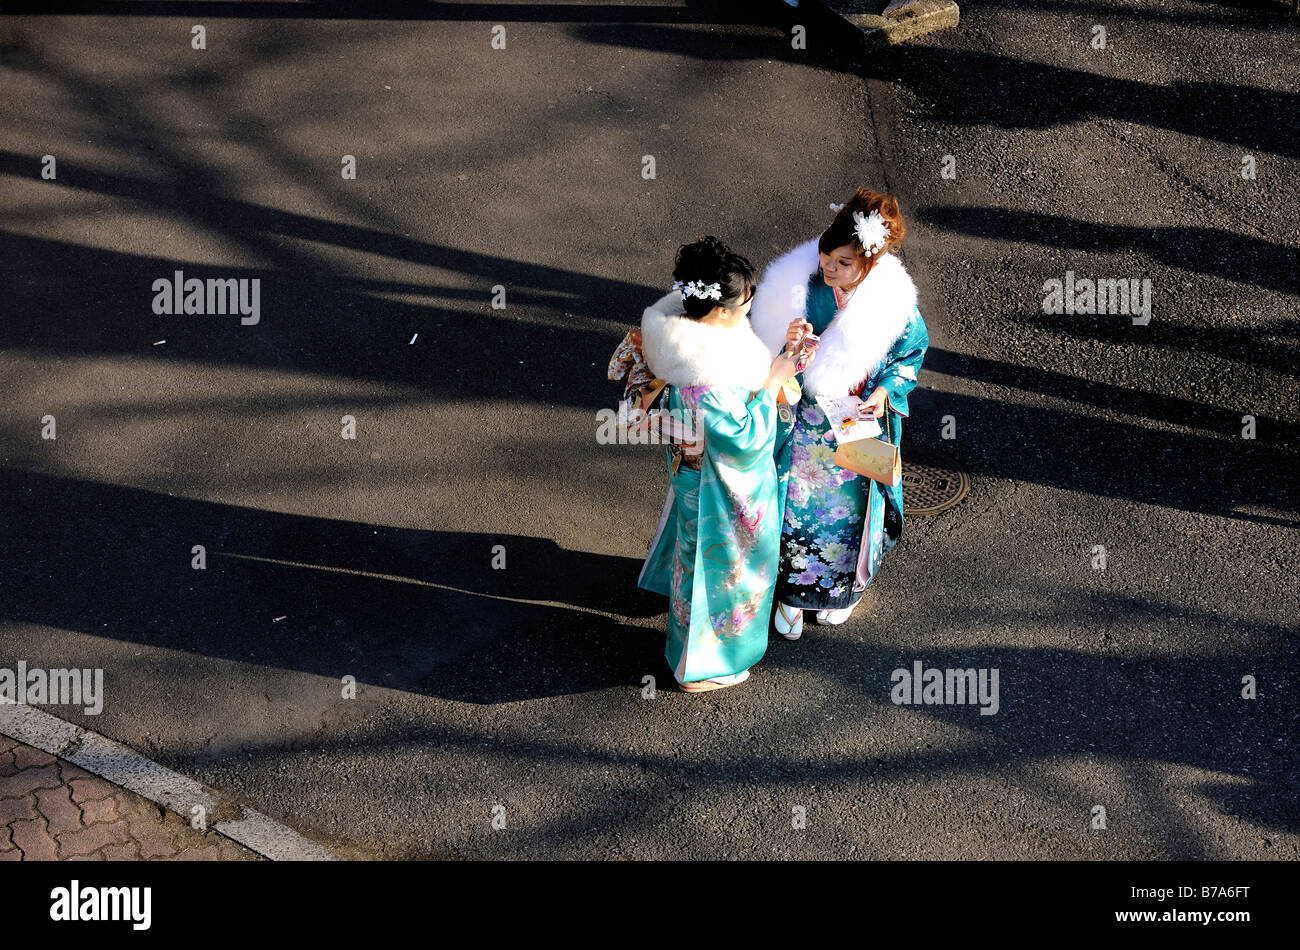 Two kimono clad 20 year old Japanese women look at photos on a camera monitor during an event to mark Coming of Age Day Stock Photo